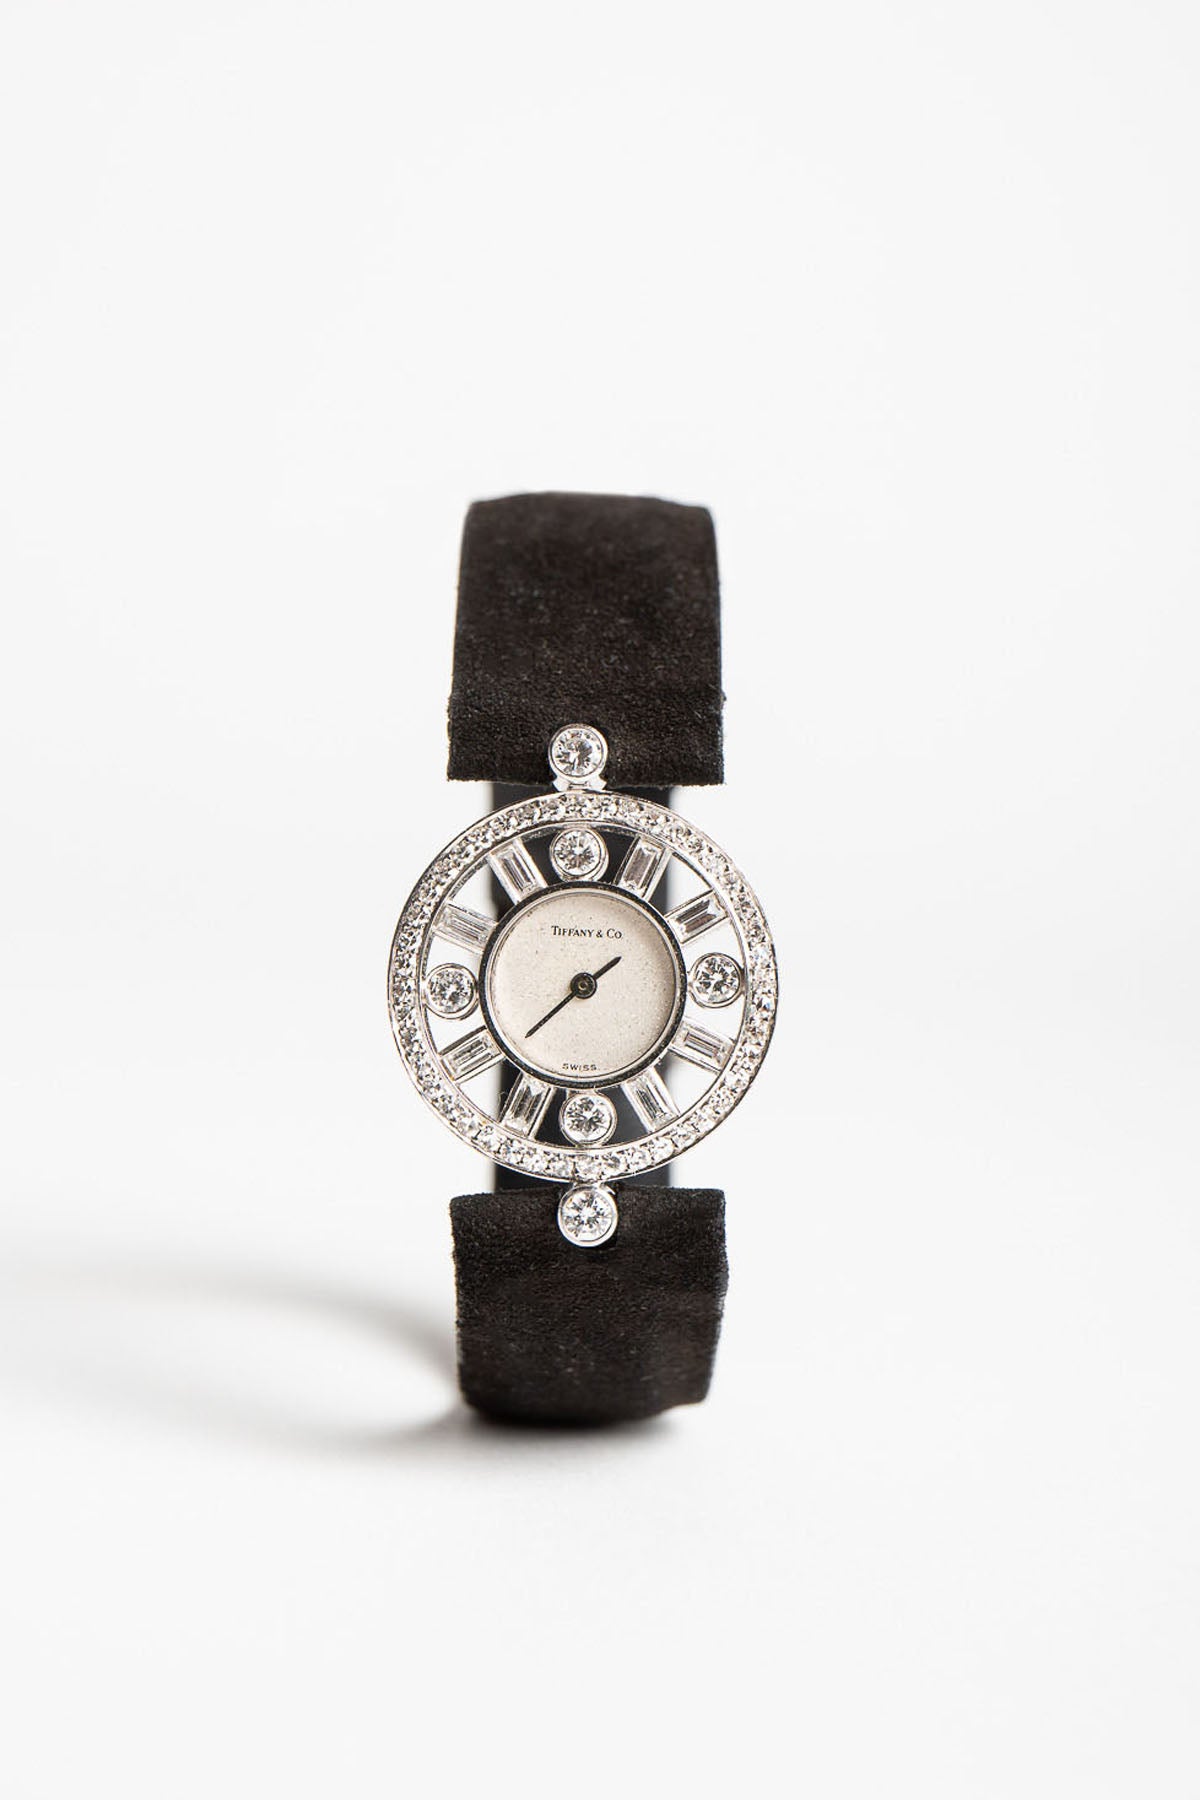 MAXFIELD PRIVATE COLLECTION | 1984 TIFFANY PALOMA PICASSO WATCH